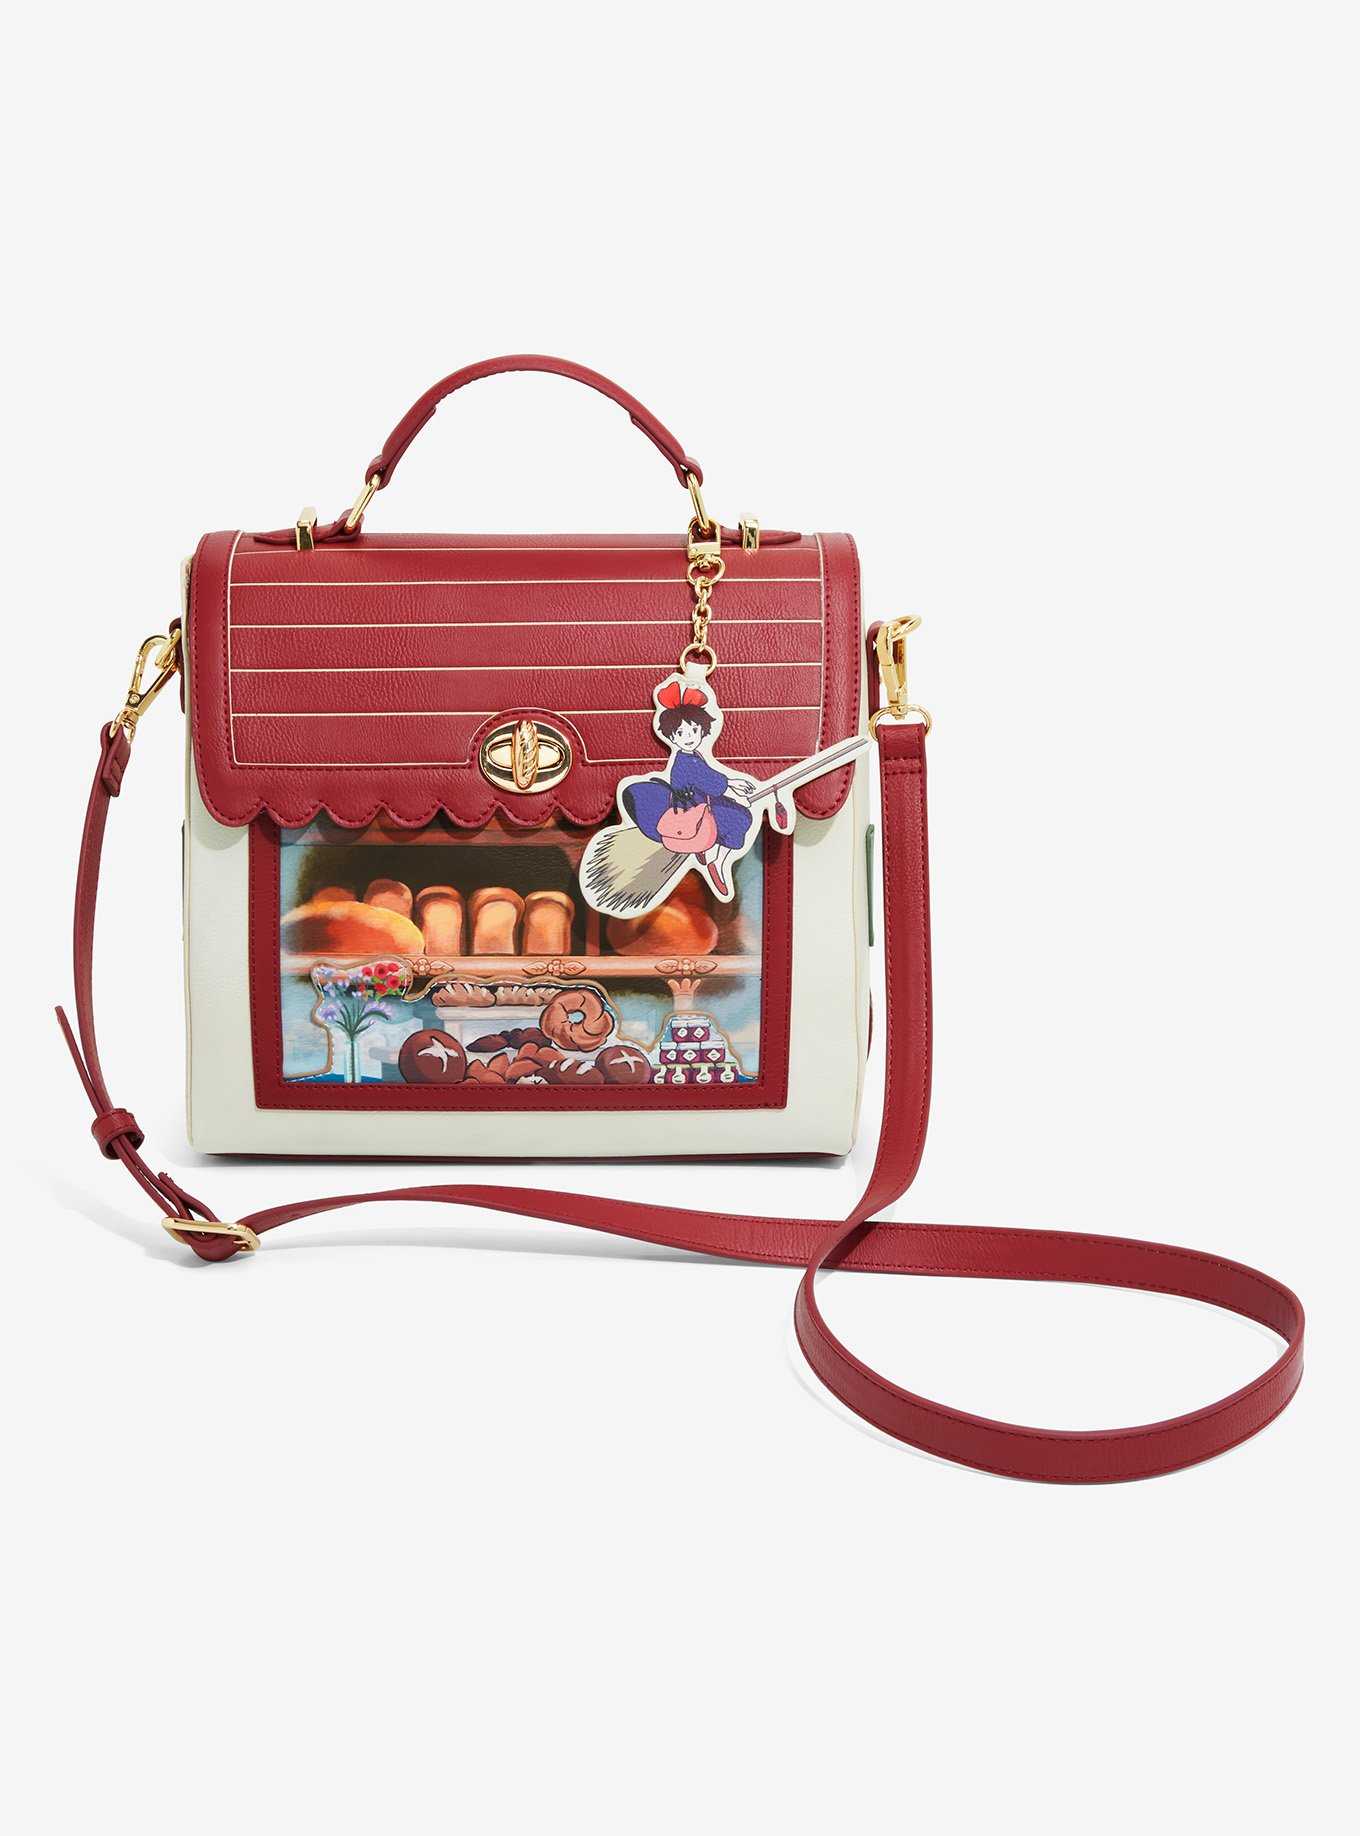 Our Universe Studio Ghibli Kiki's Delivery Service Bakery Figural Crossbody Bag - BoxLunch Exclusive, , hi-res